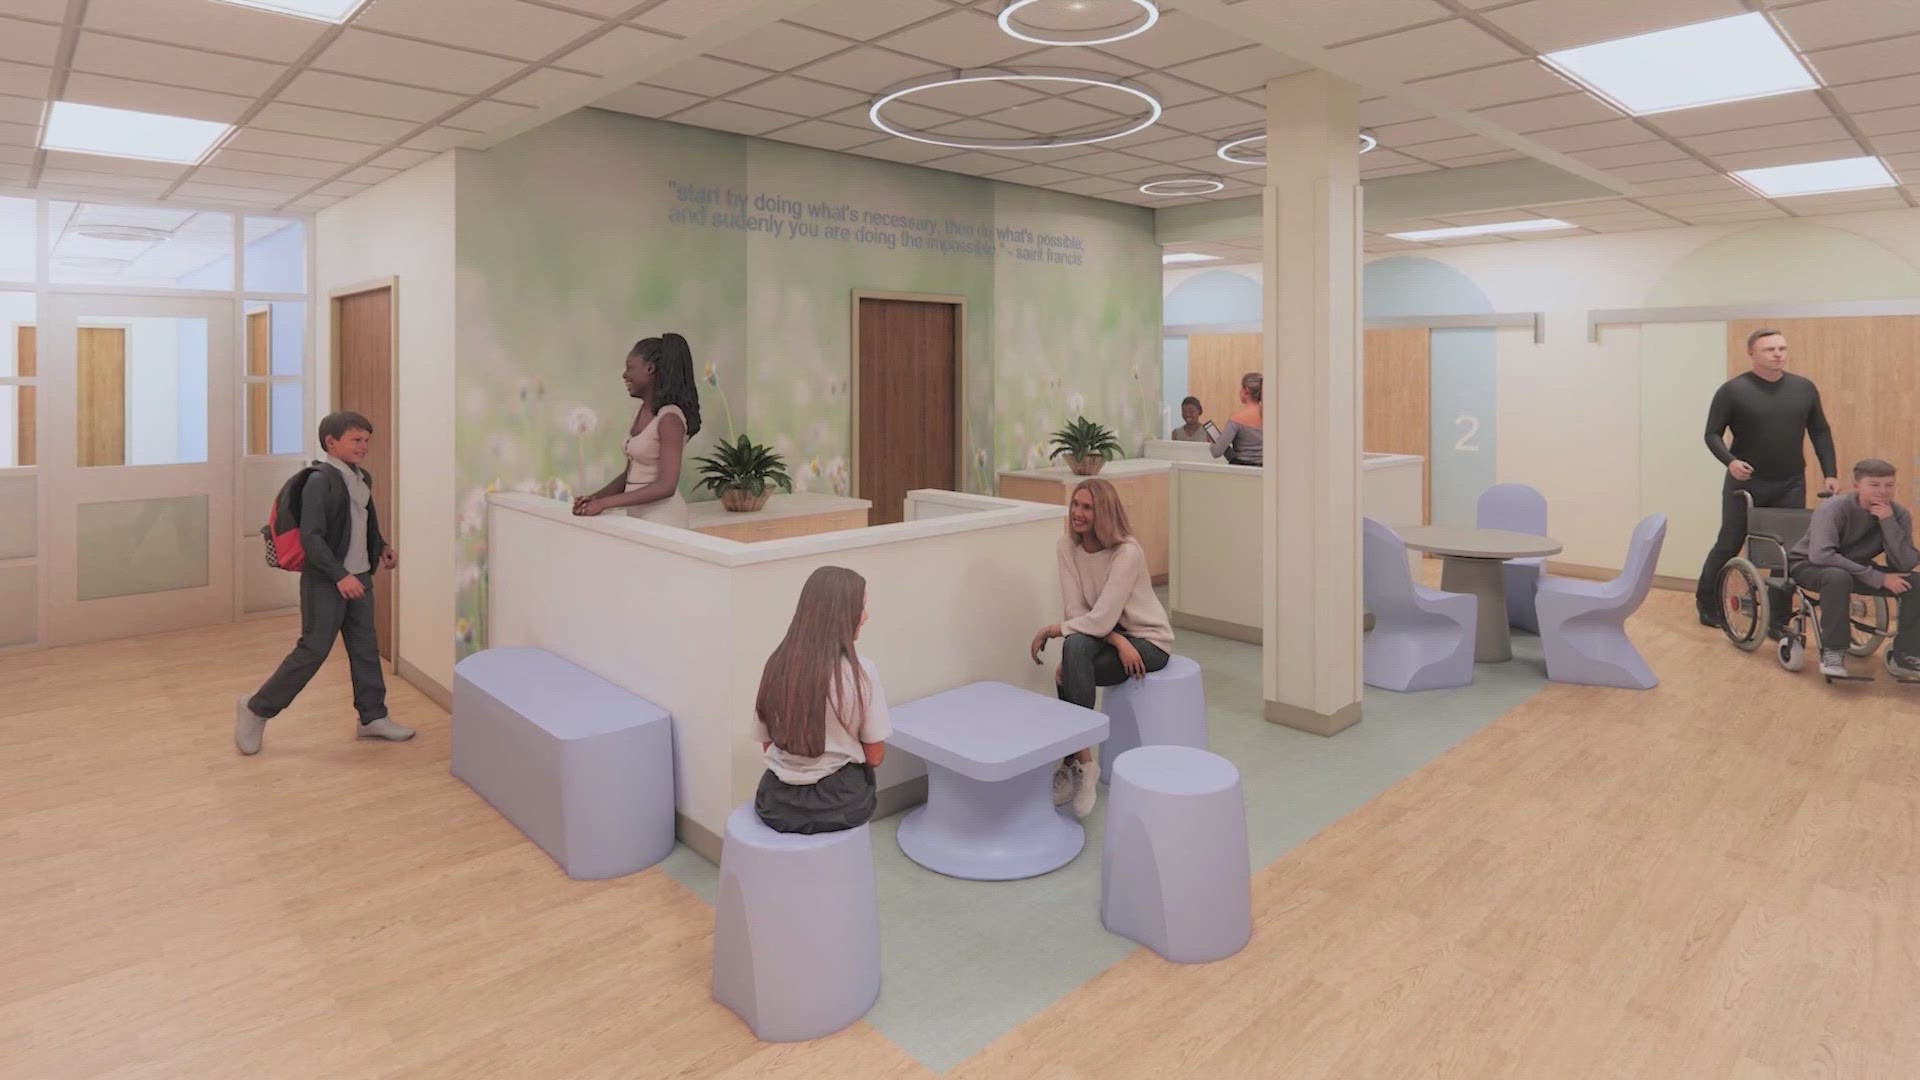 Phase 1 of the renovations includes creating eight private rooms for highly acute mental health patients.